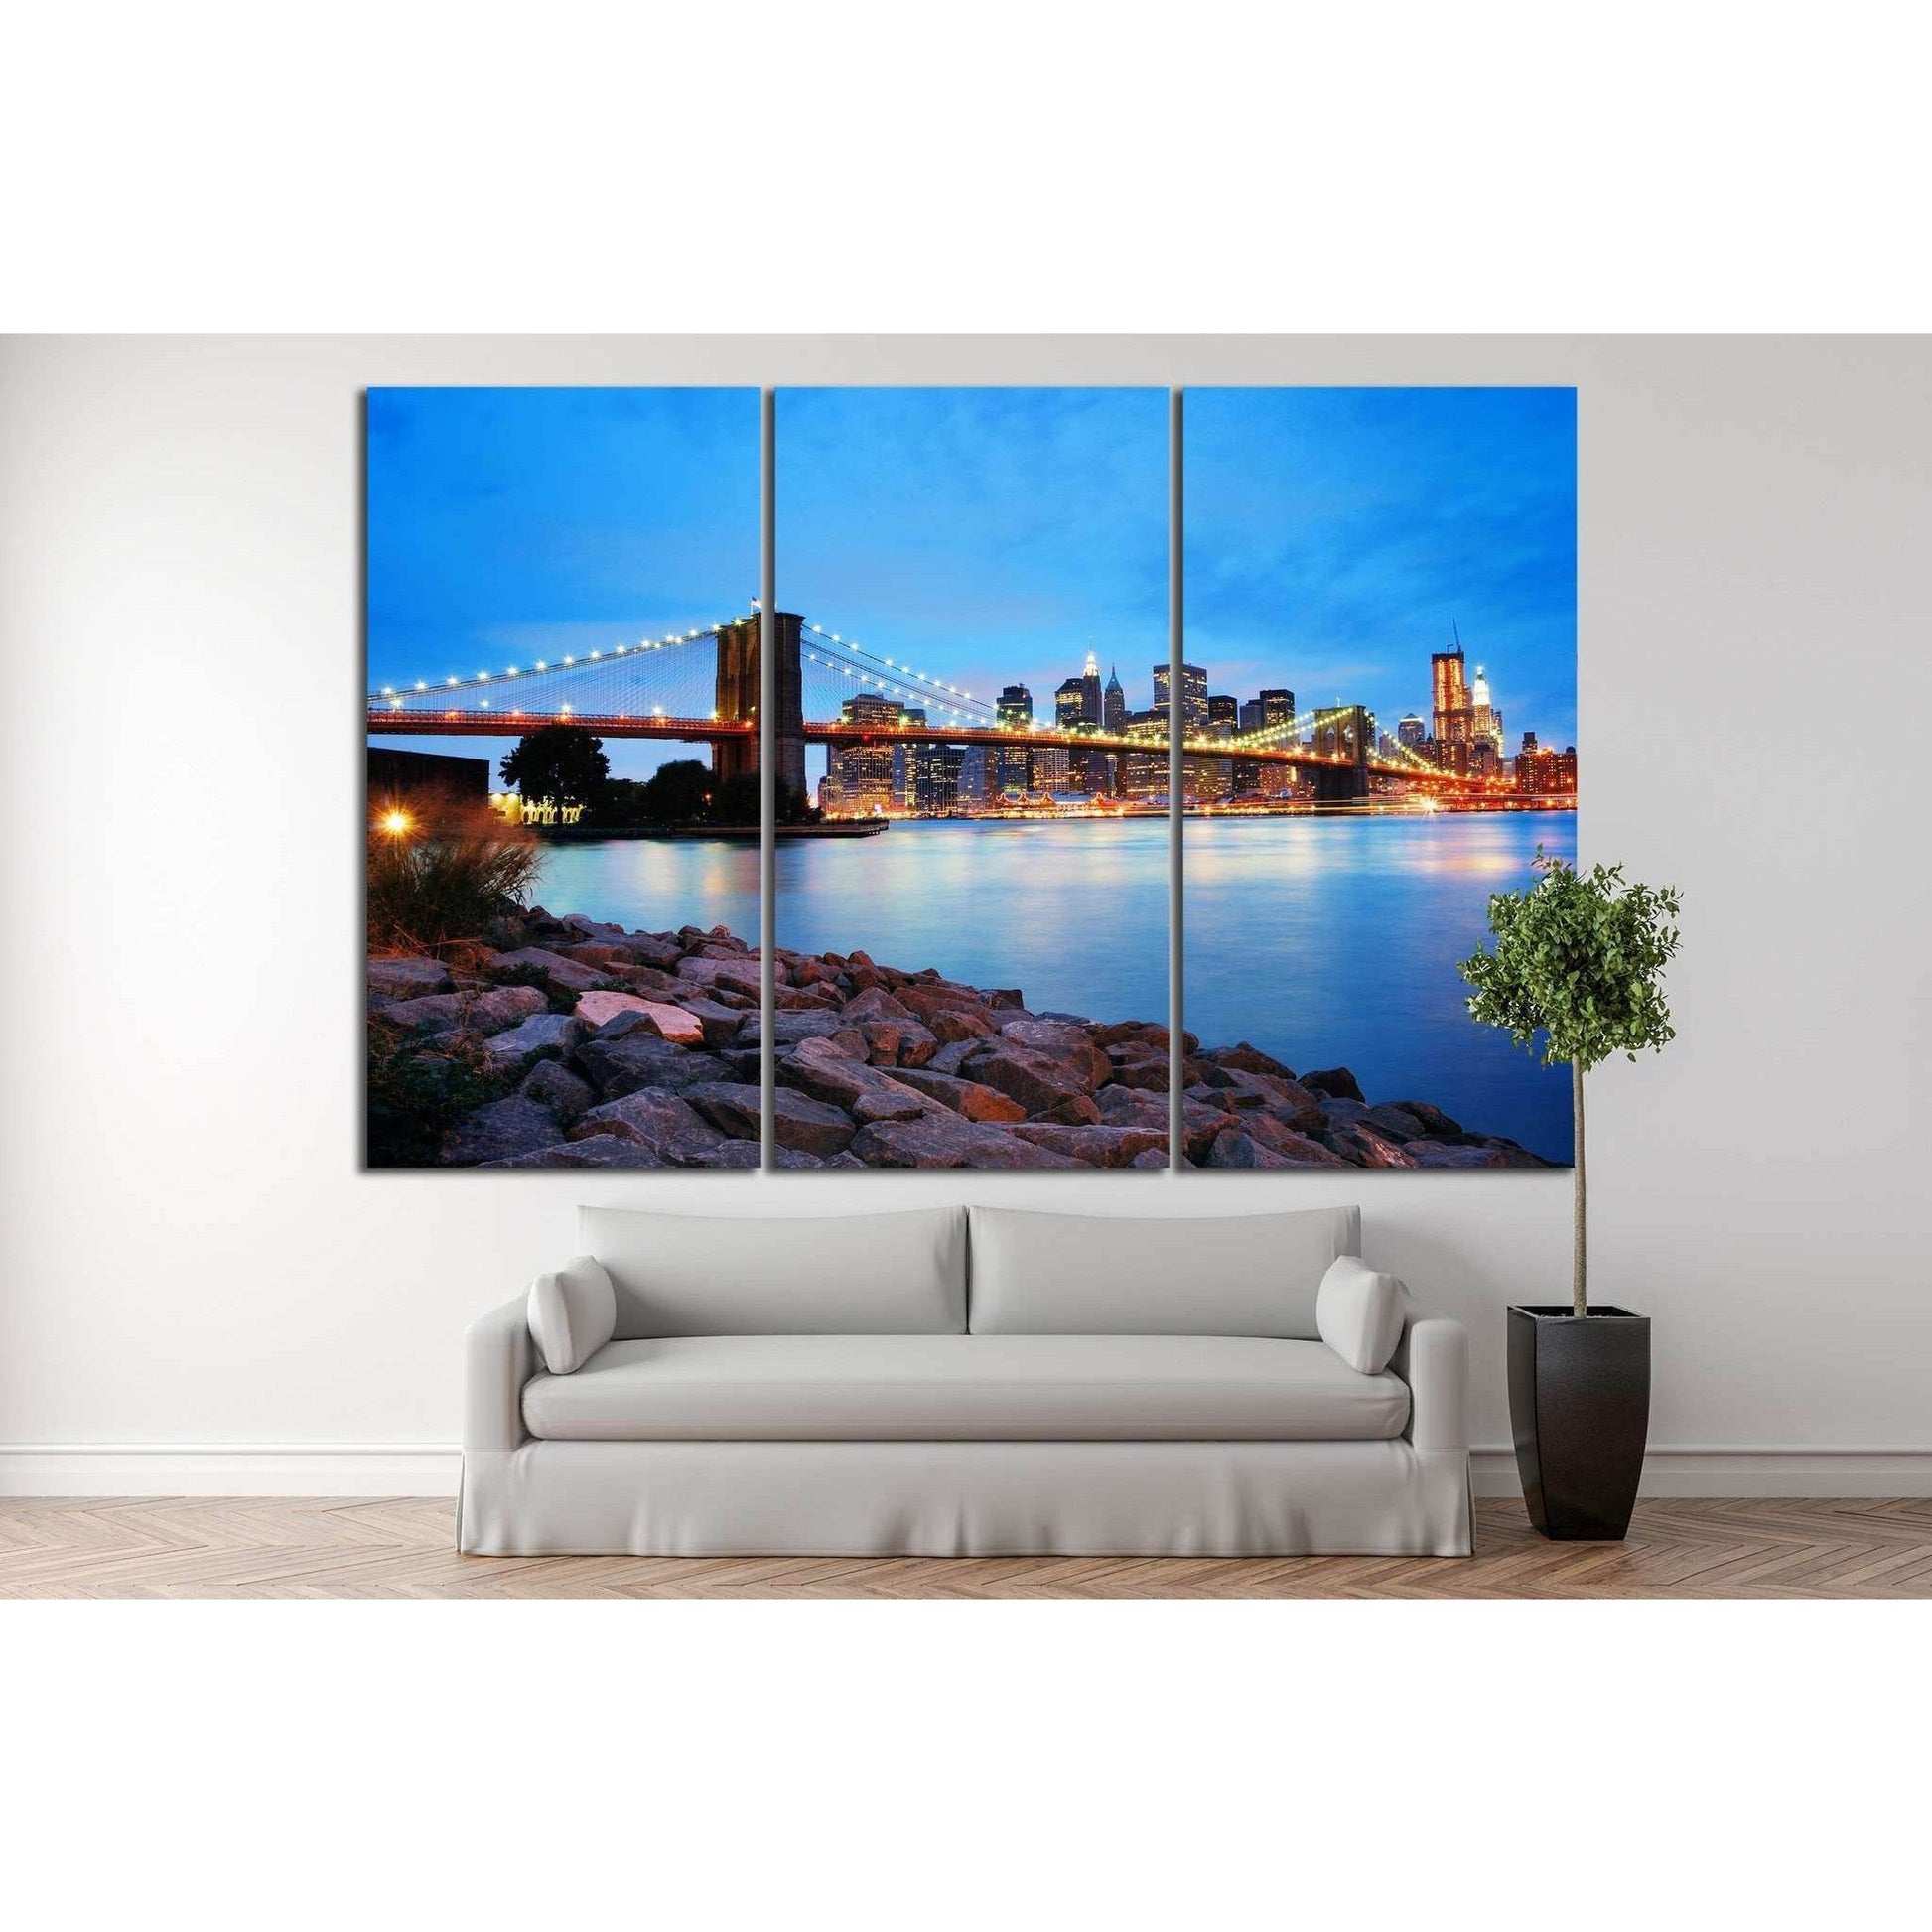 Brooklyn Bridge Photography Wall Art Canvas PrintDecorate your walls with a stunning Brooklyn Bridge Canvas Art Print from the world's largest art gallery. Choose from thousands of Brooklyn Bridge photography artworks with various sizing options. Choose y